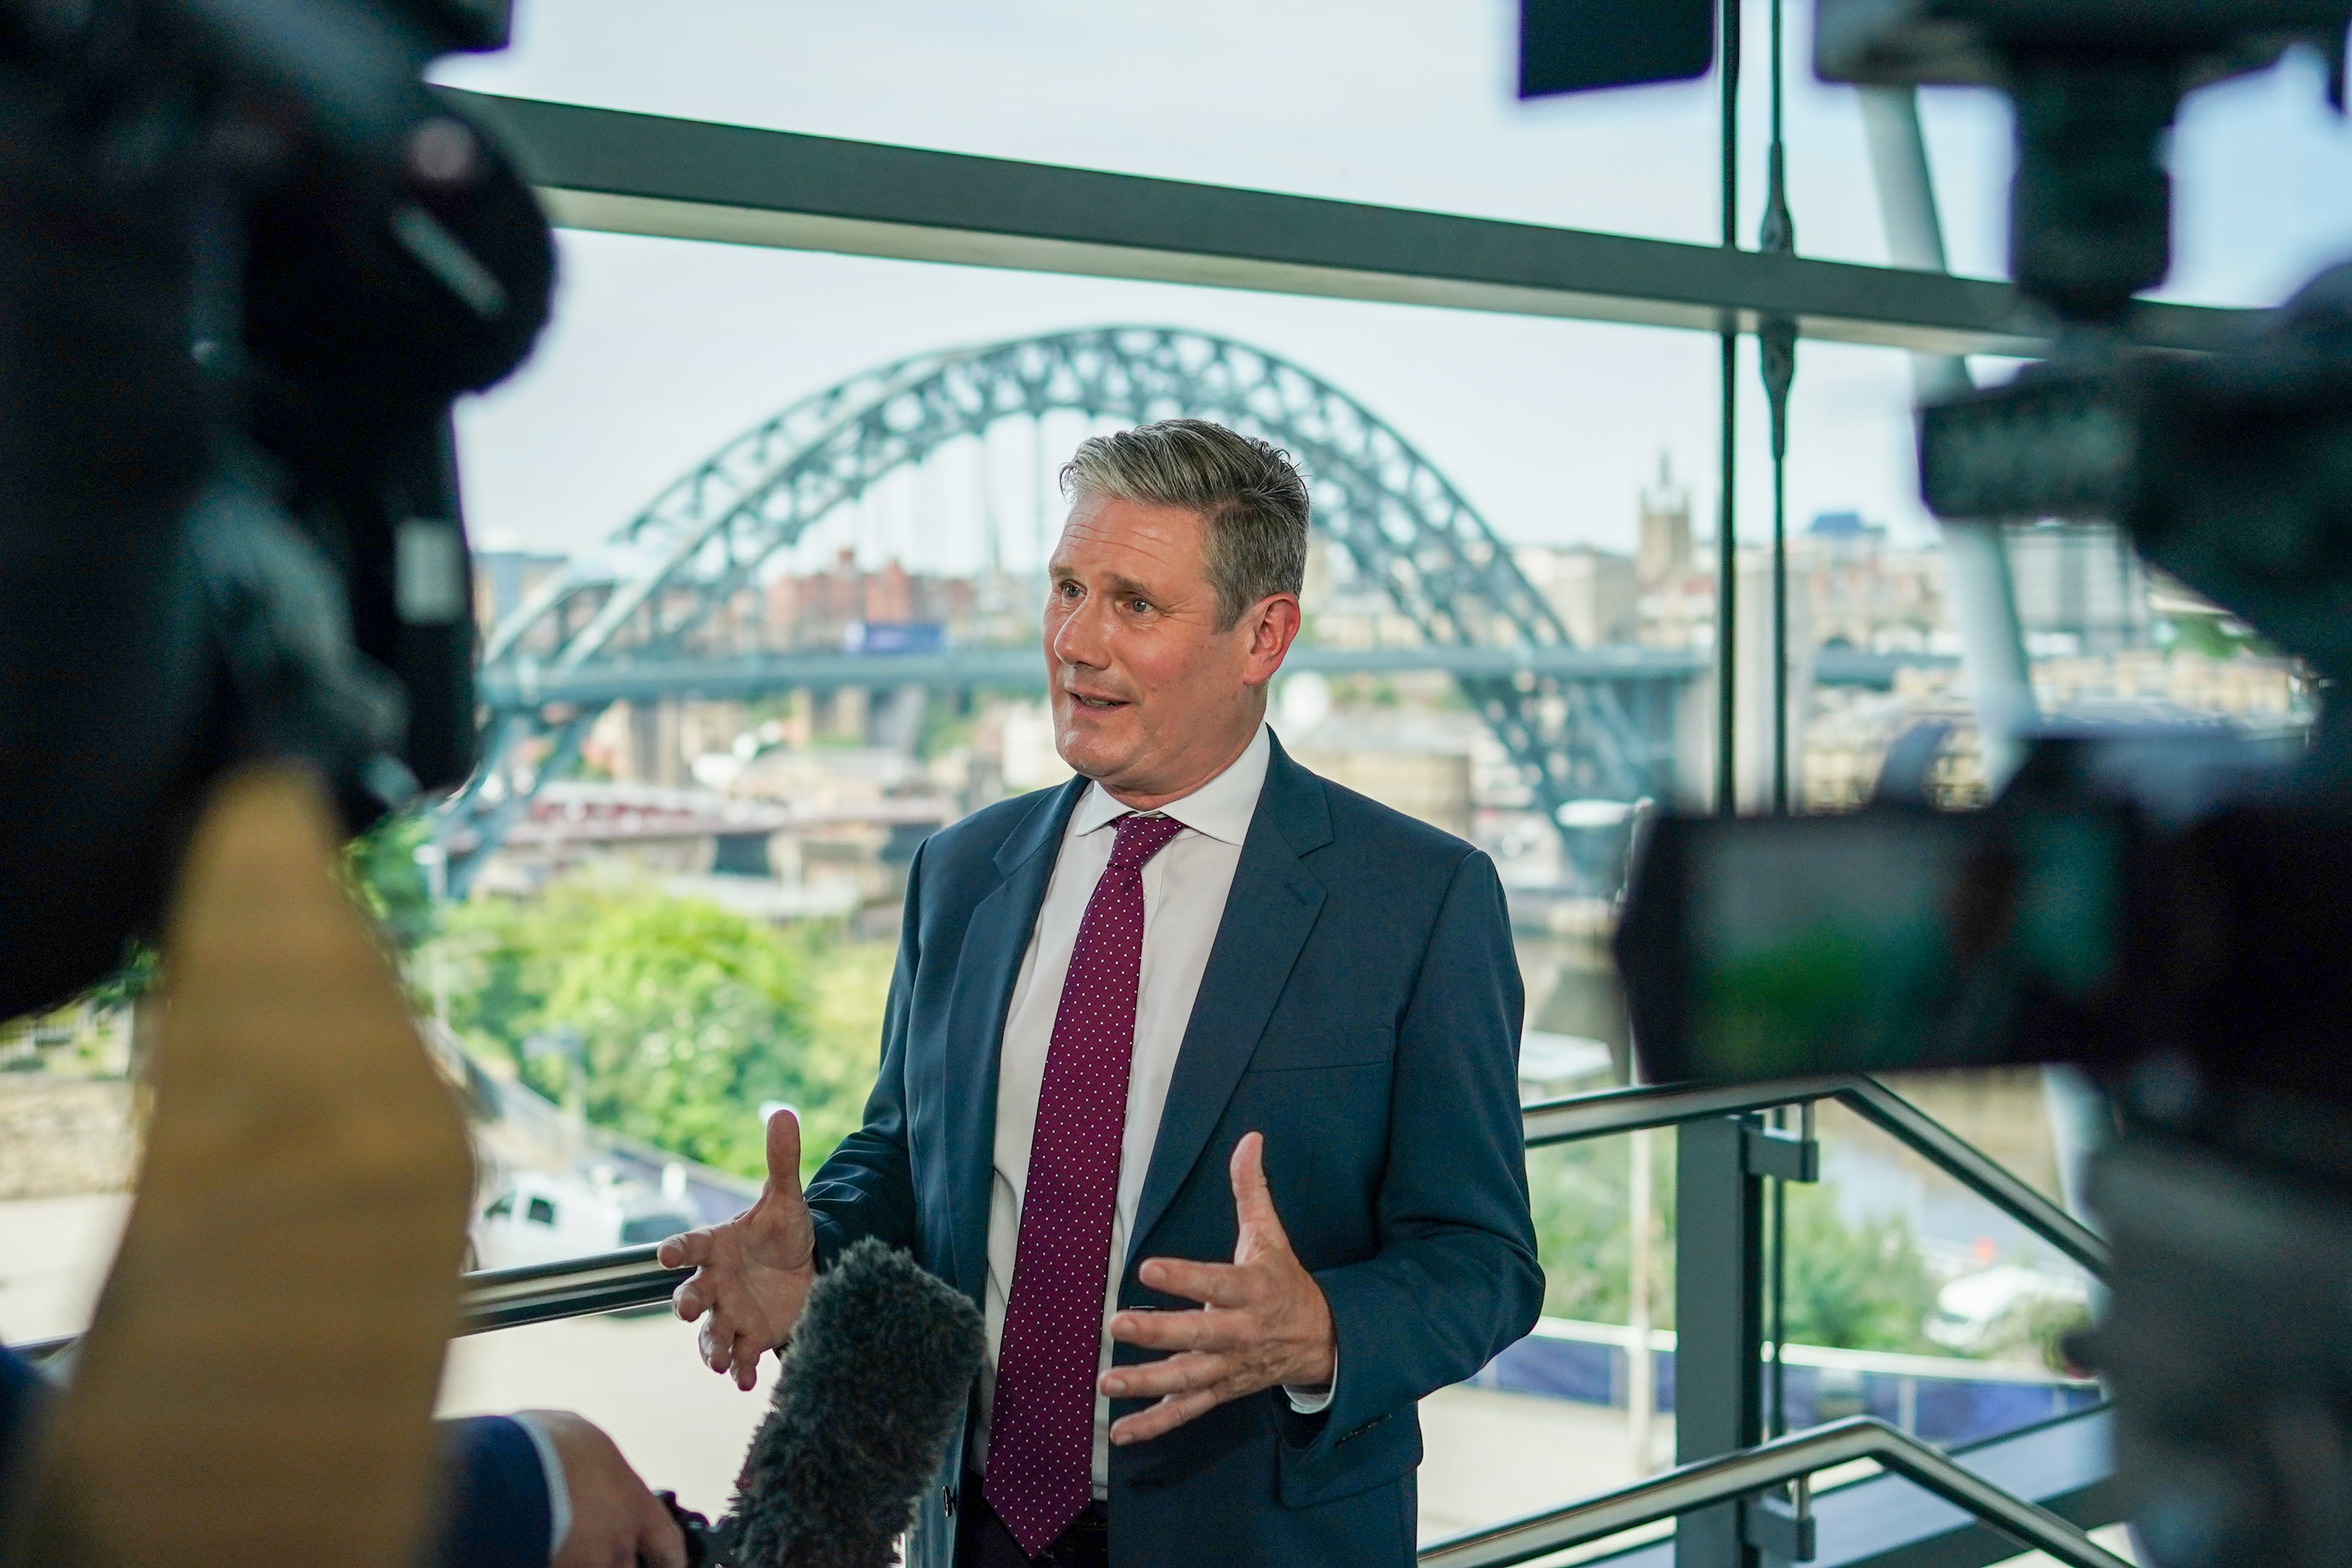 Sir Keir Starmer will table the motion of no confidence on Tuesday and seek a vote on Wednesday